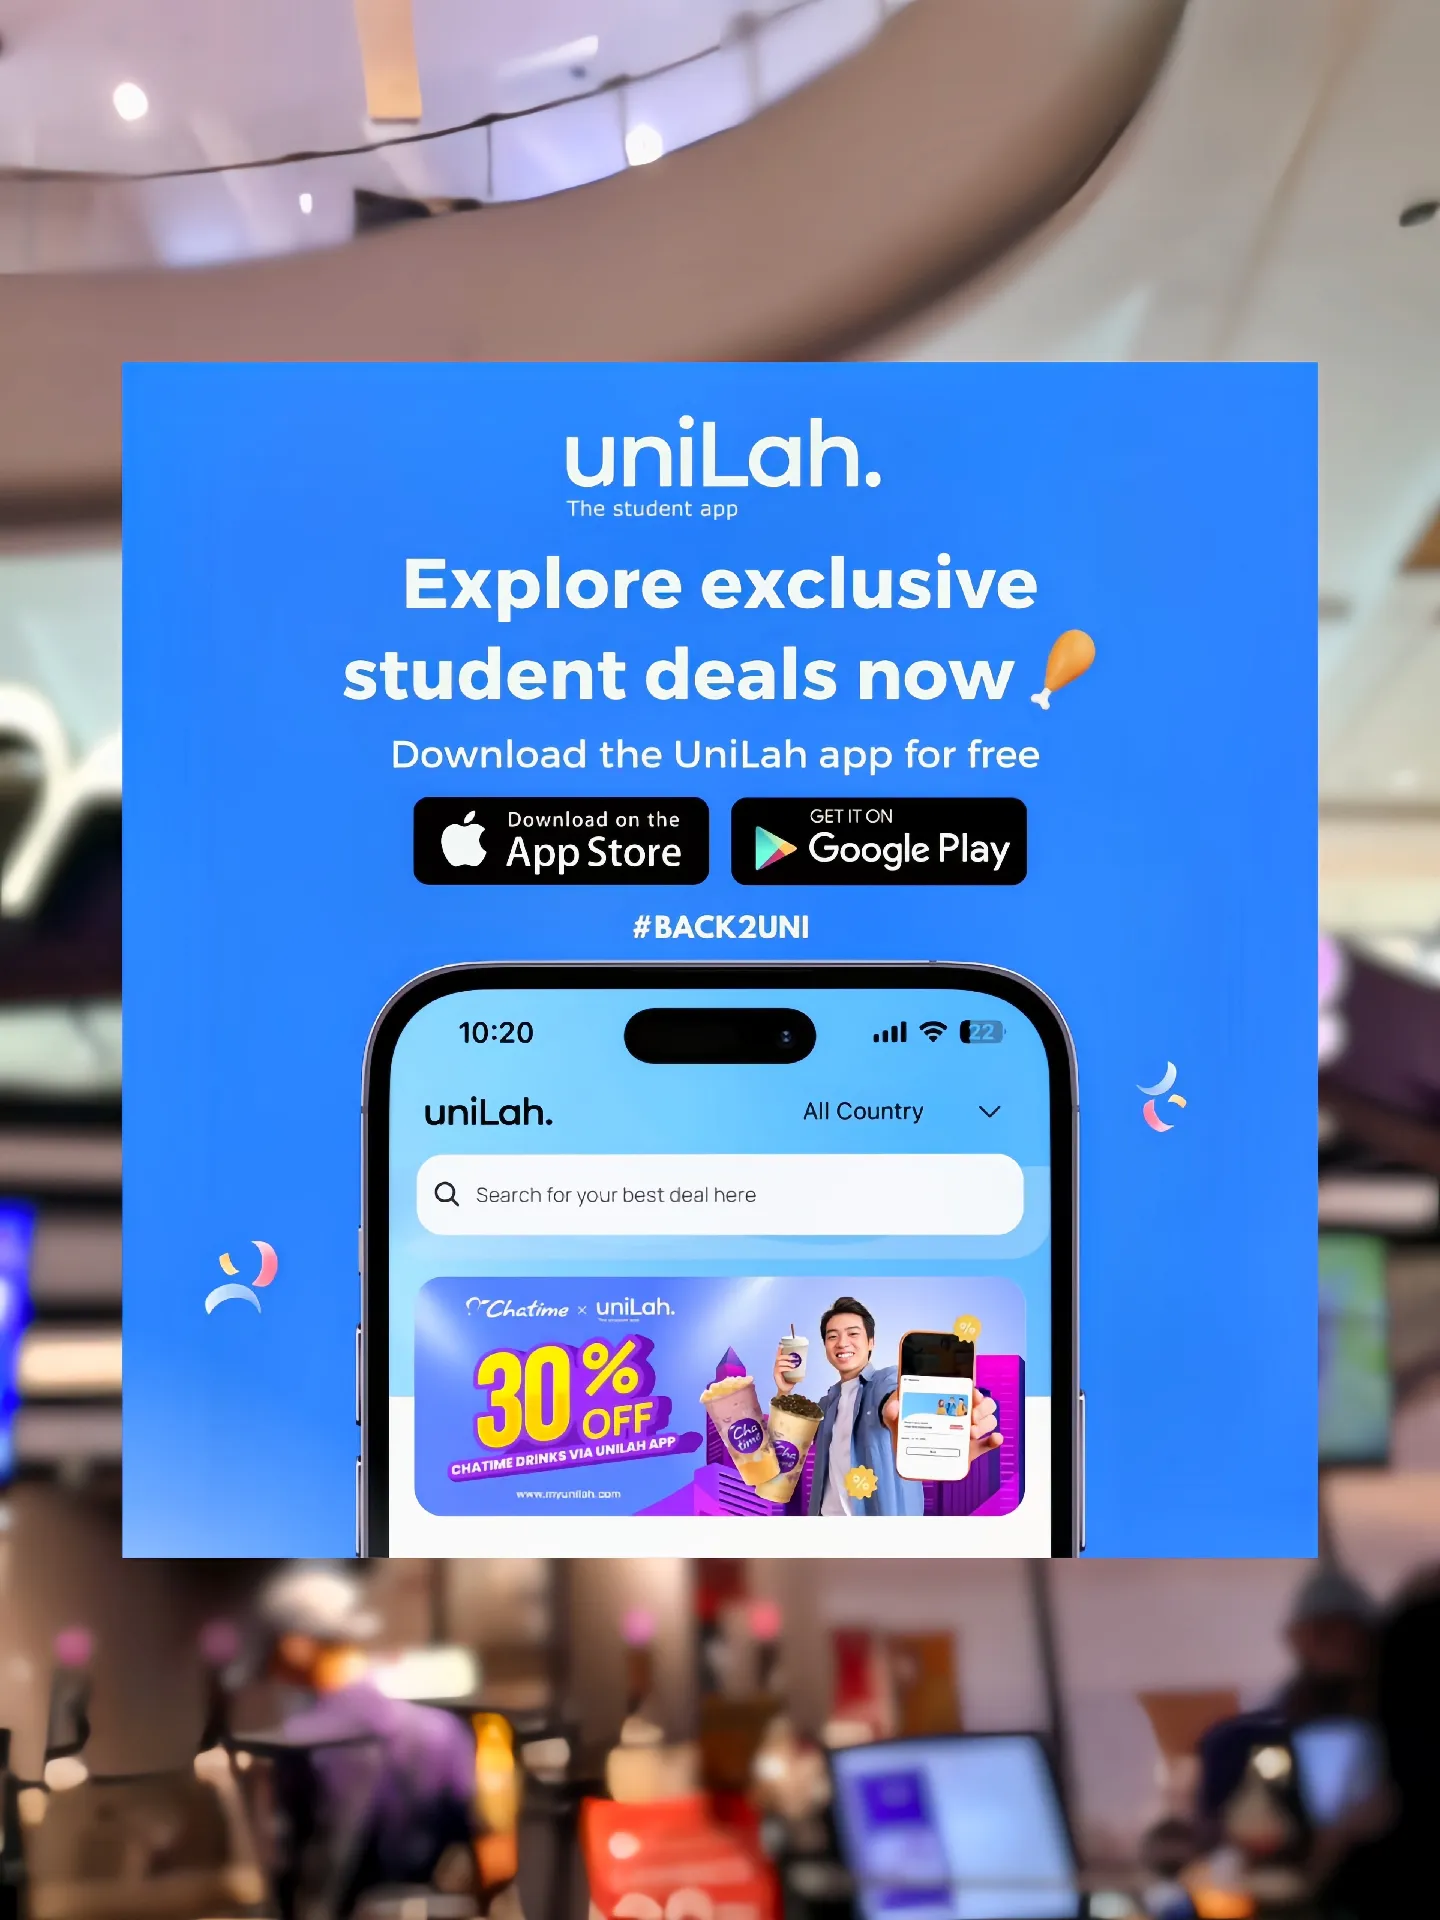 🆓 Chatime for STUDENTS ONLY    | ₘₒcₕₐₐₐが投稿したフォトブック